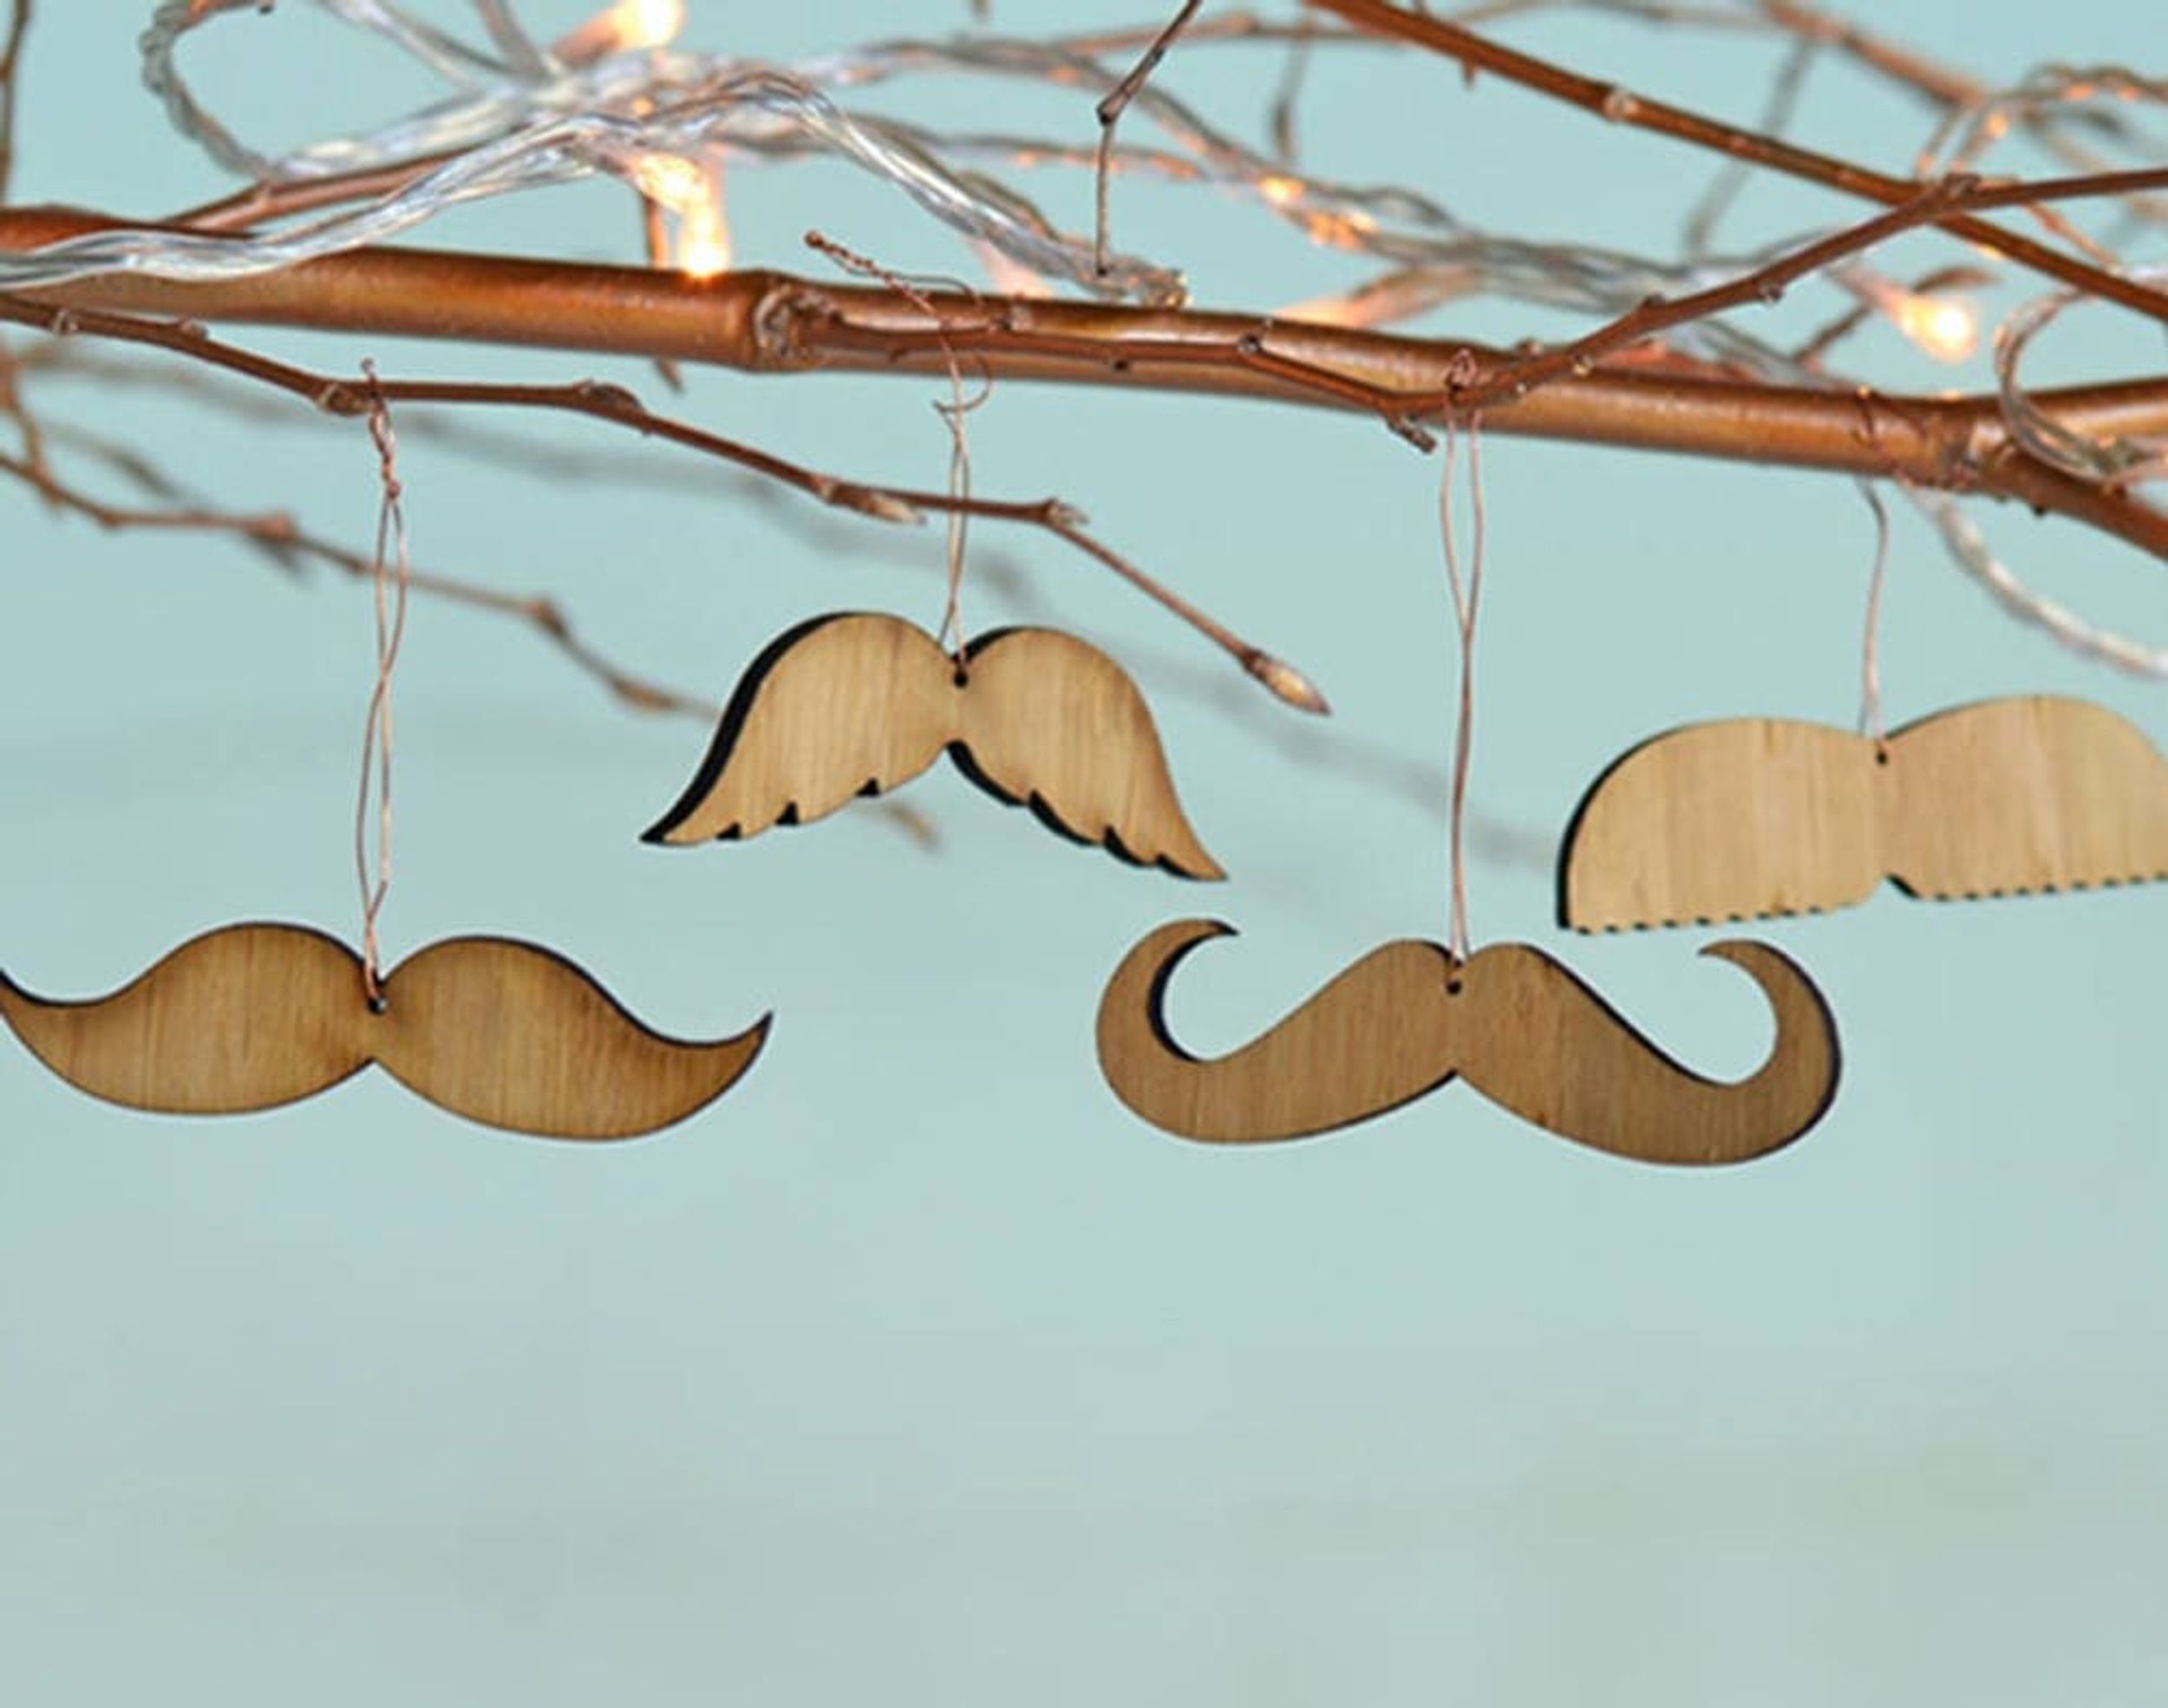 30 Ornaments That Will Have You Rockin’ Around the Xmas Tree